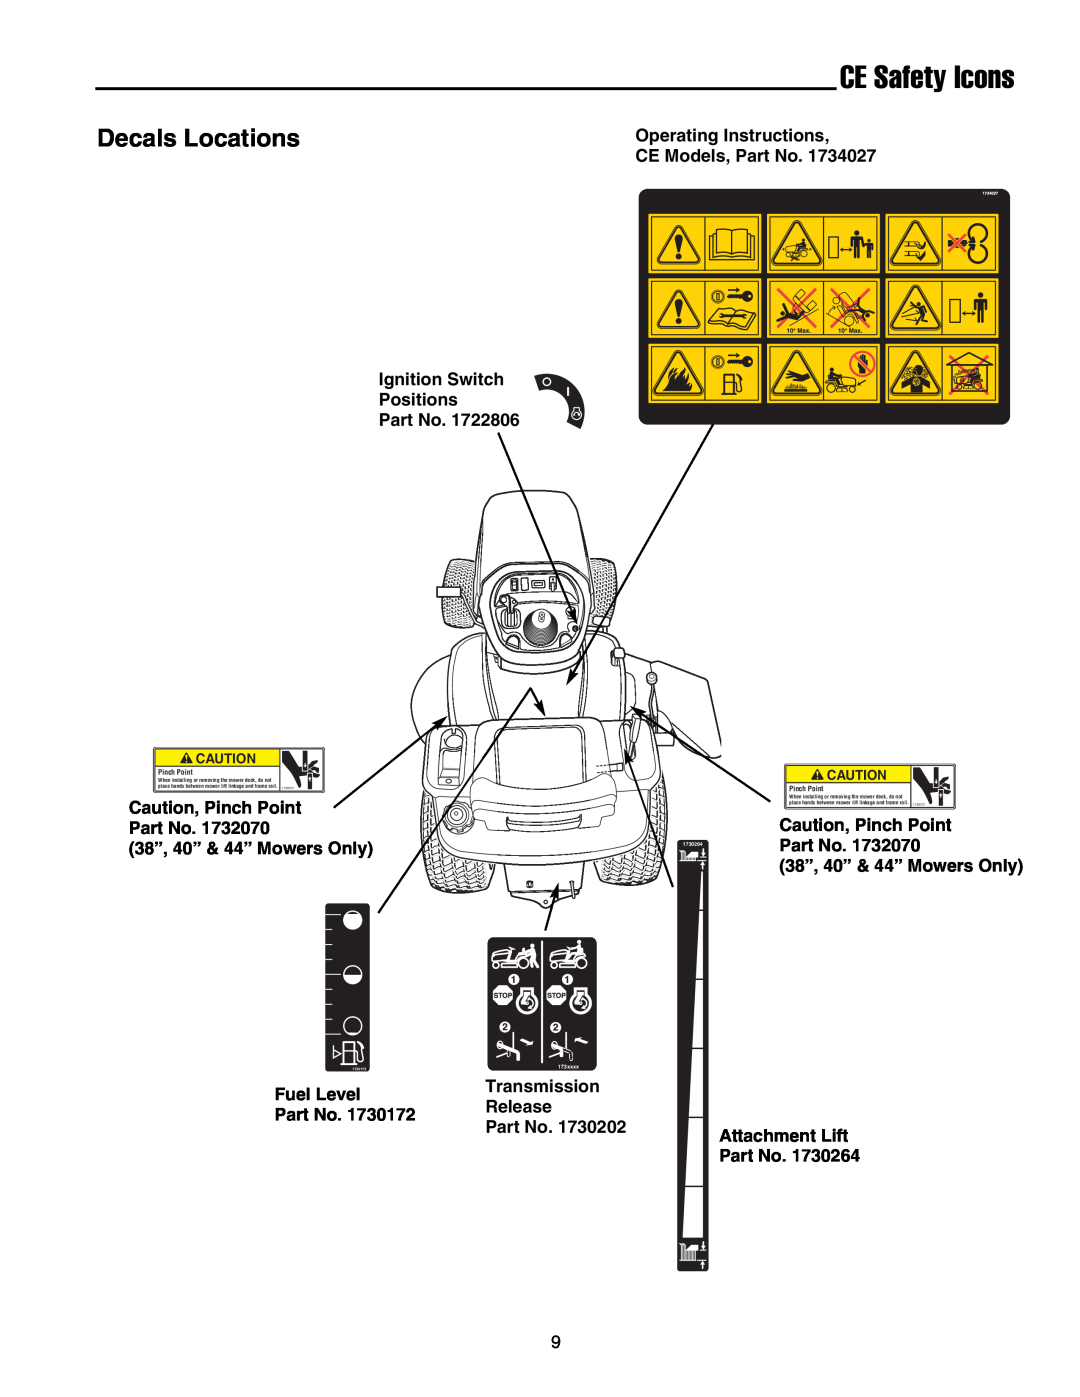 Snapper LT-200 Series manual CE Safety Icons, Decals Locations 